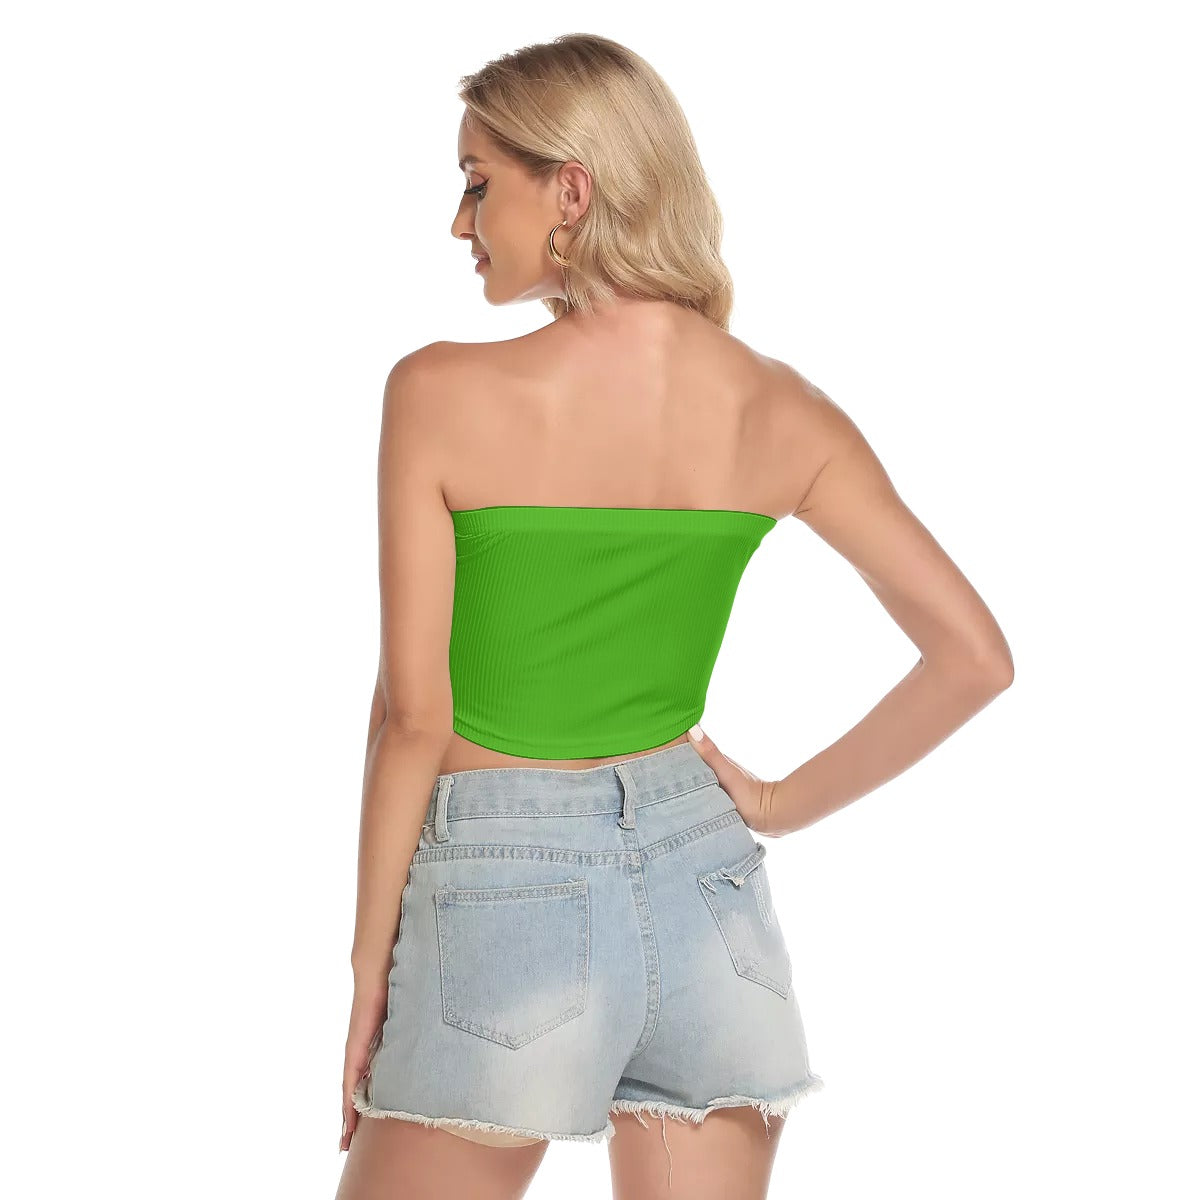 THE LOGO TUBE TOP IN KELLY GREEN - Panic 39